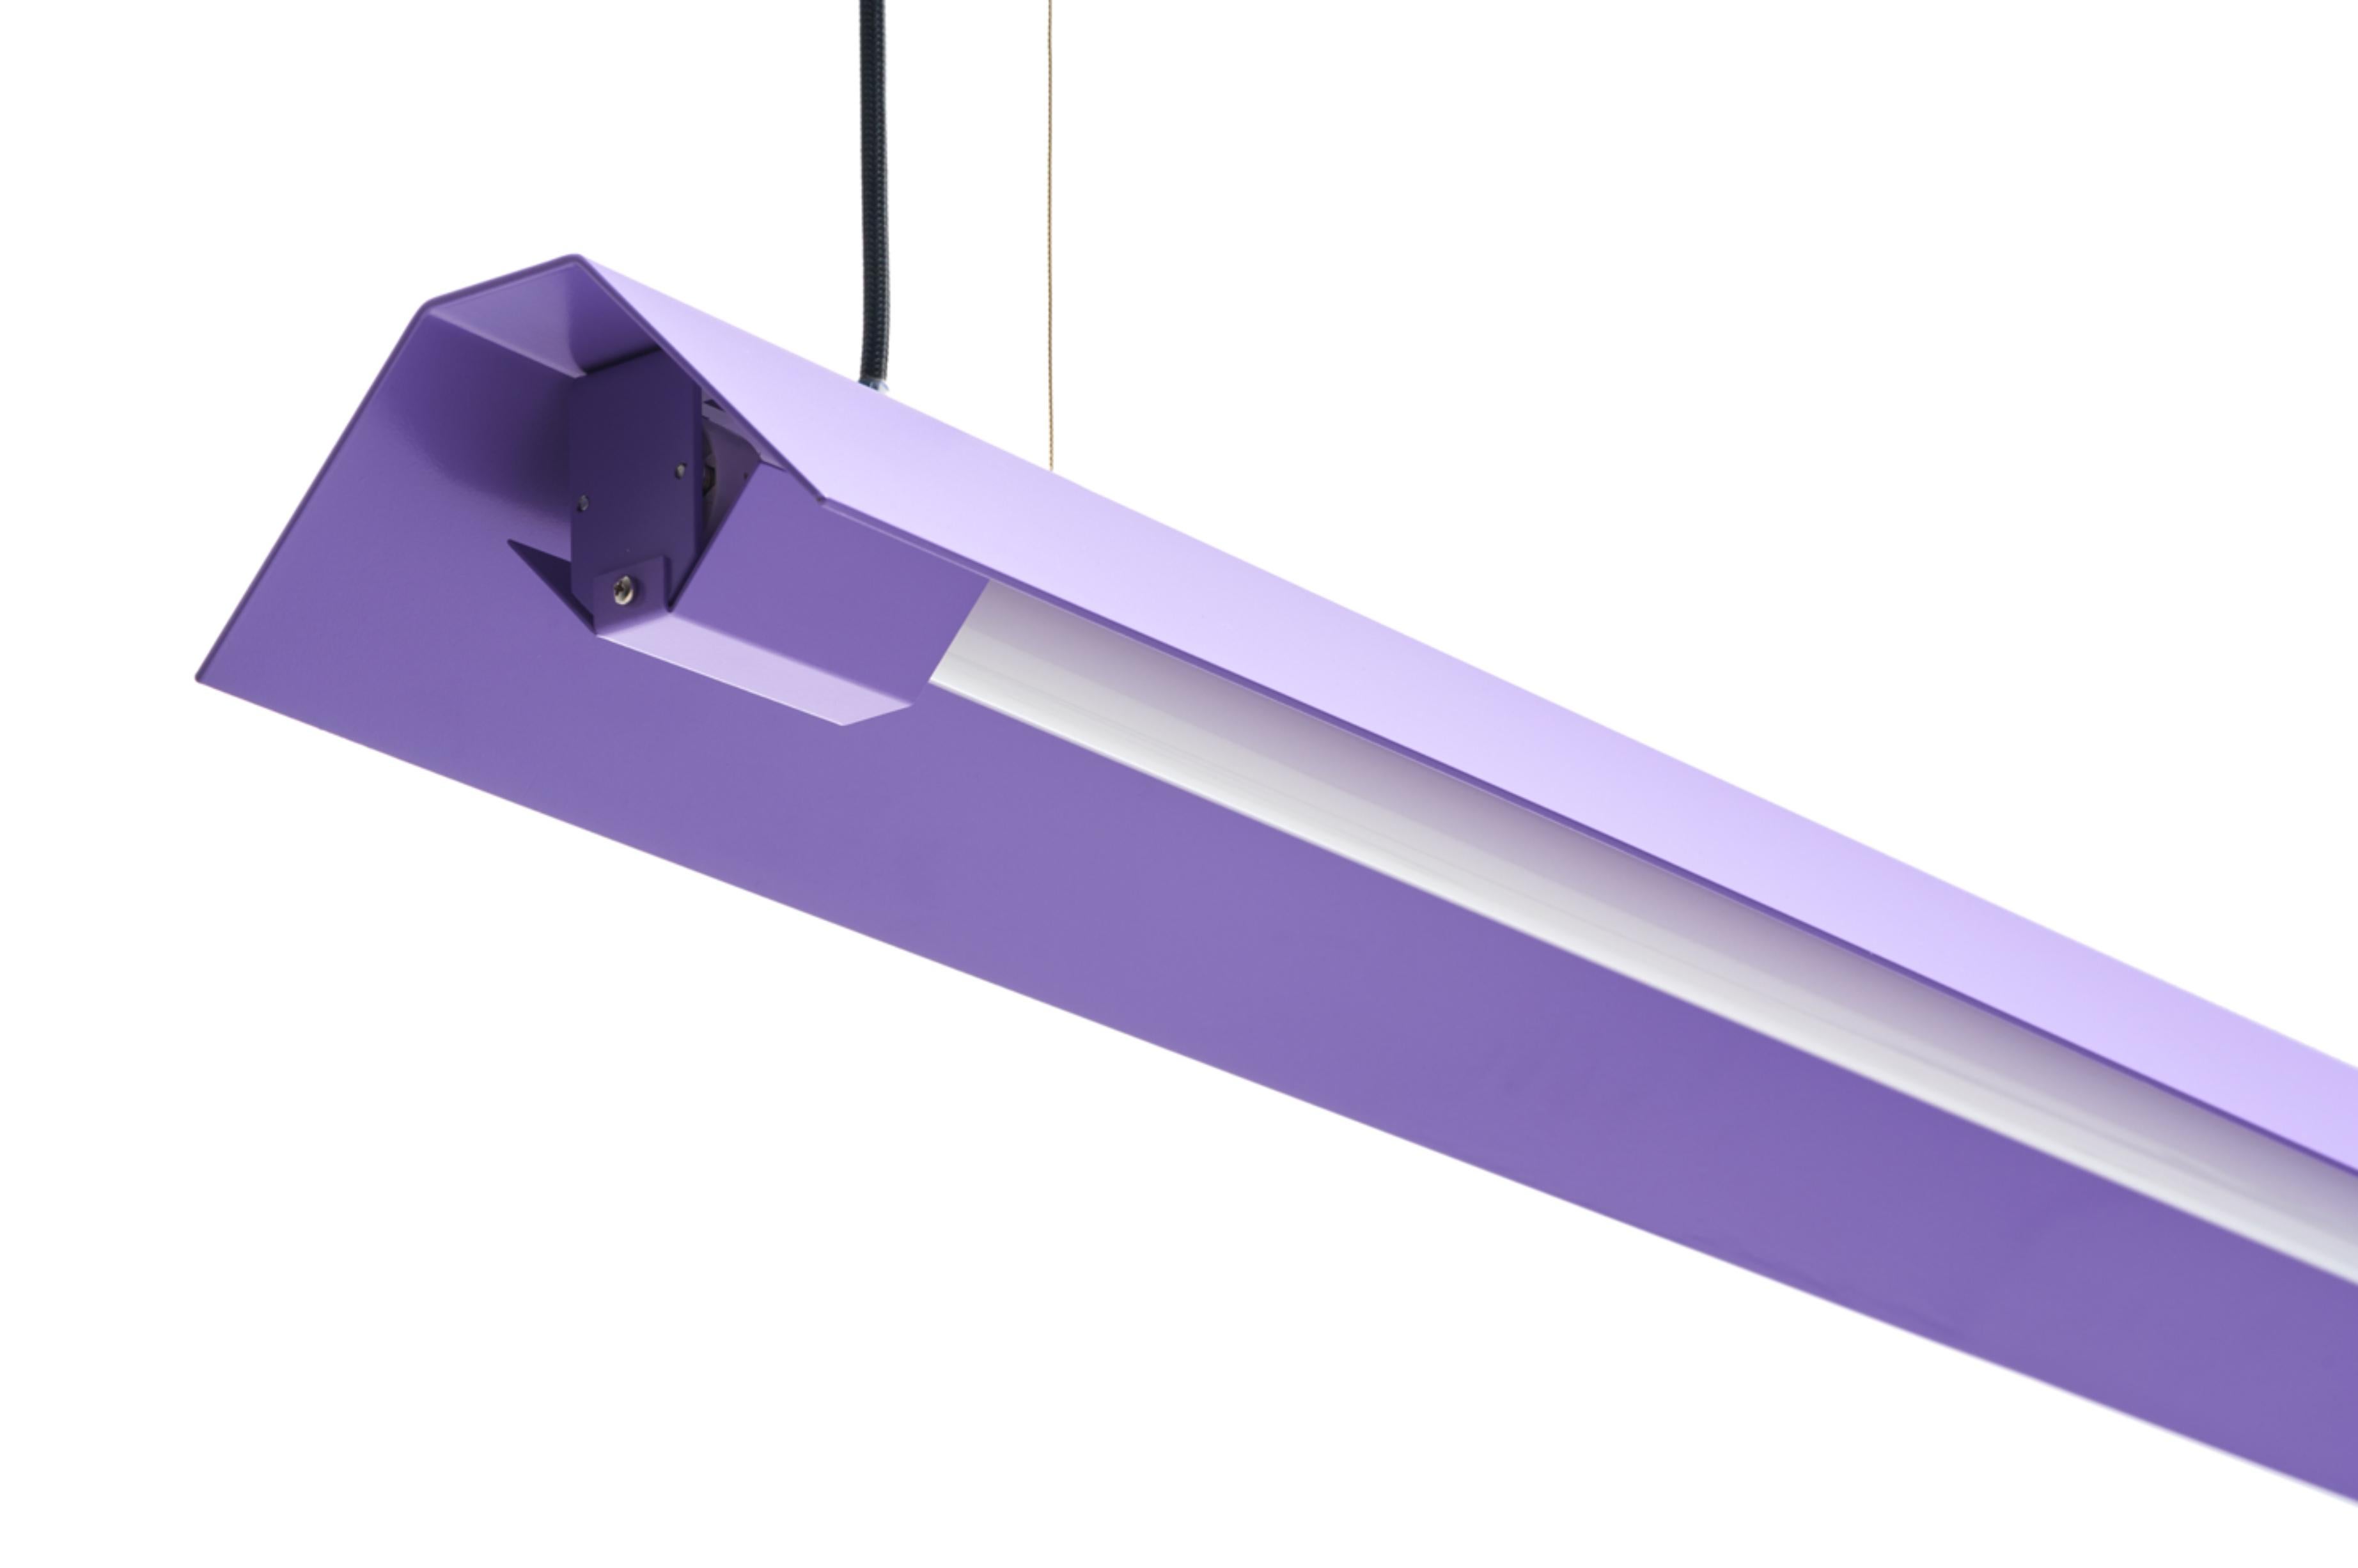 Medium misalliance ral lavender suspended light by lexavala.
Dimensions: D 16 x W 100 x H 8 cm
Materials: powder coated aluminium.

There are two lenghts of socket covers, extending over the LED. Two short are to be found in Suspended and